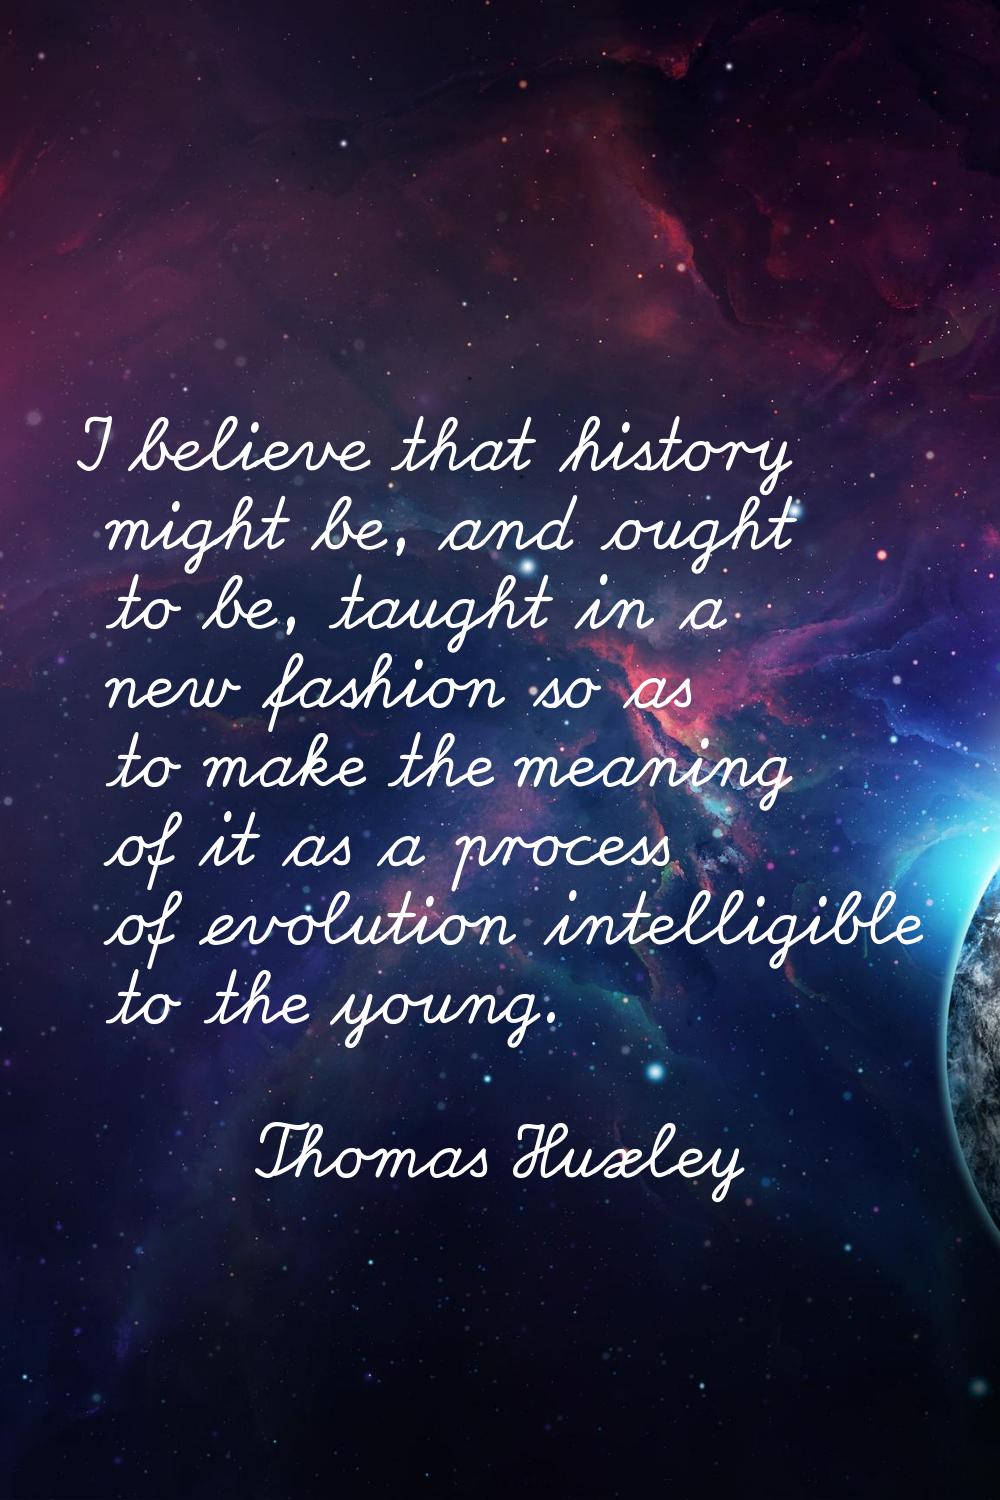 I believe that history might be, and ought to be, taught in a new fashion so as to make the meaning